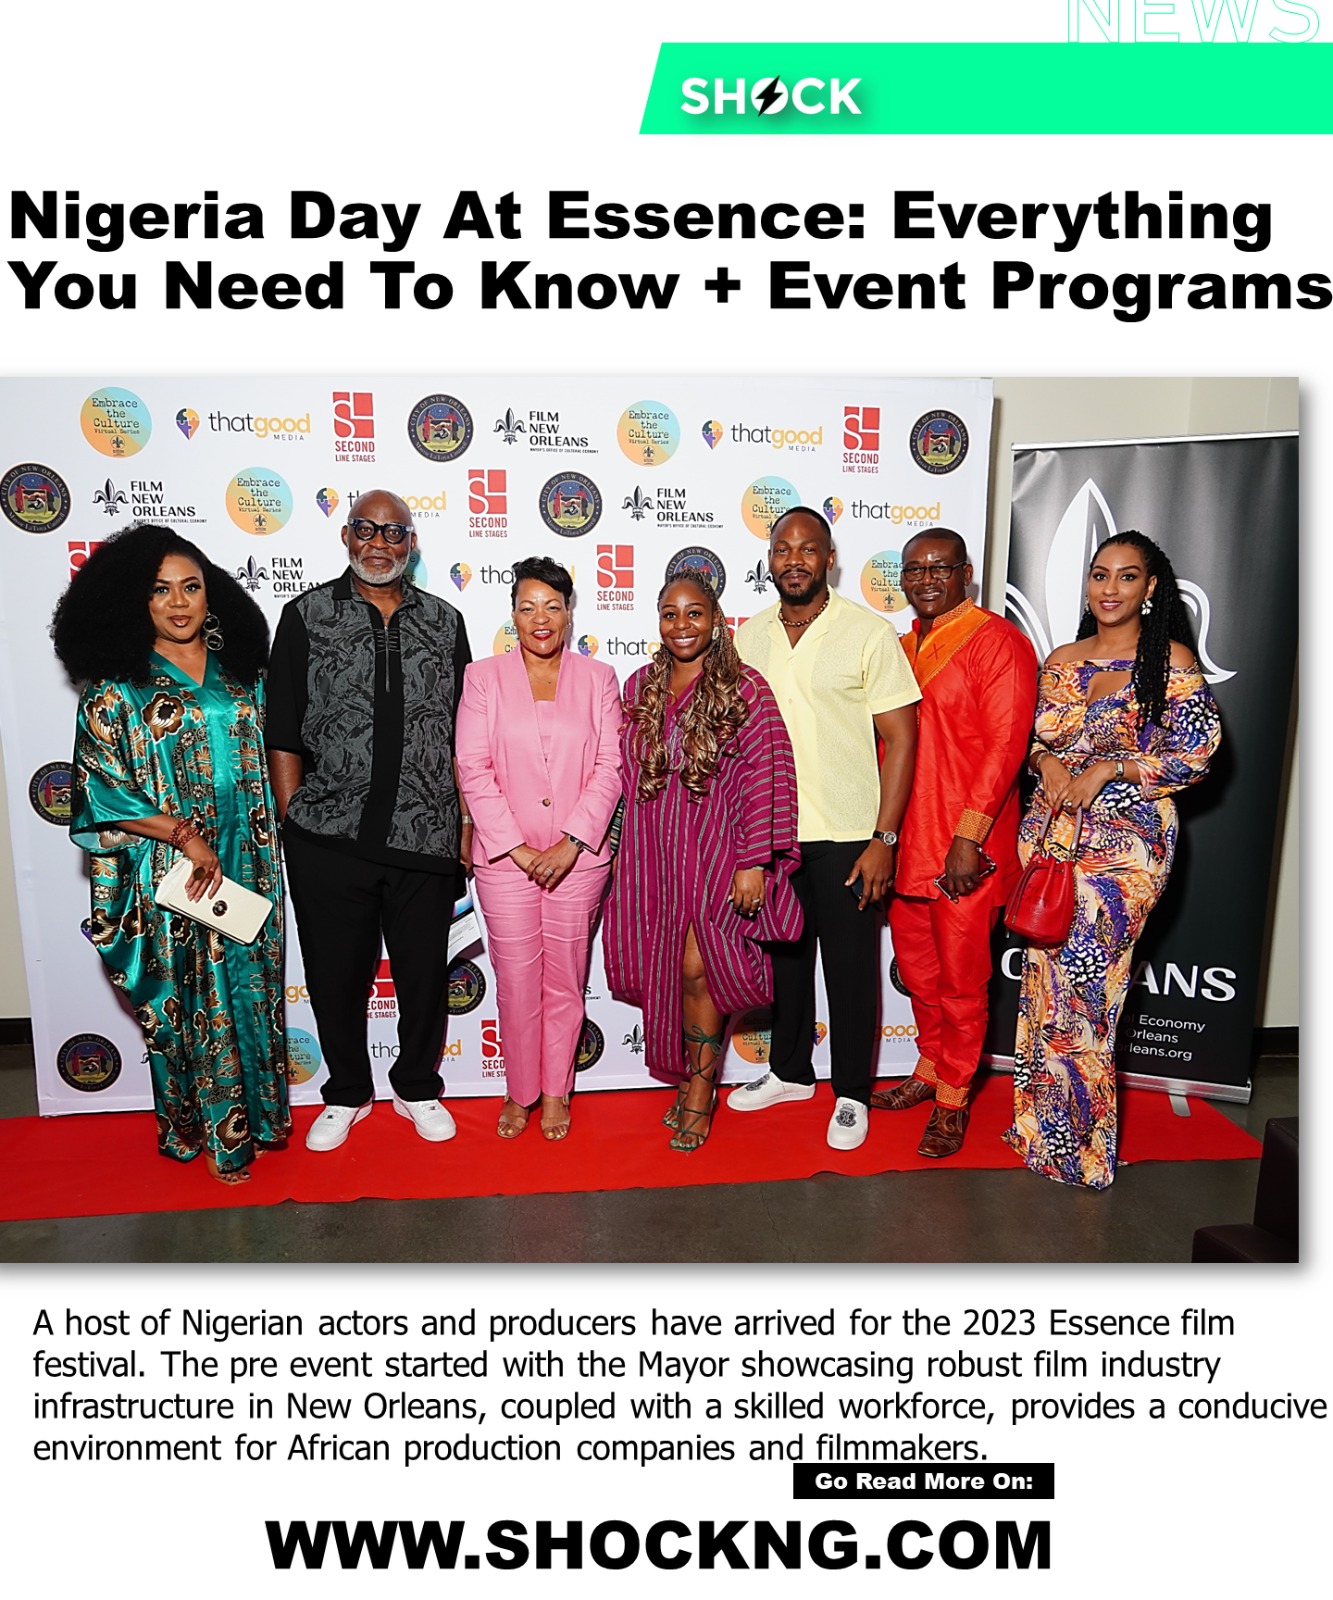 IMG 20230701 WA0006 - Nigeria Day At Essence: Everything You Need To Know + Event Programs